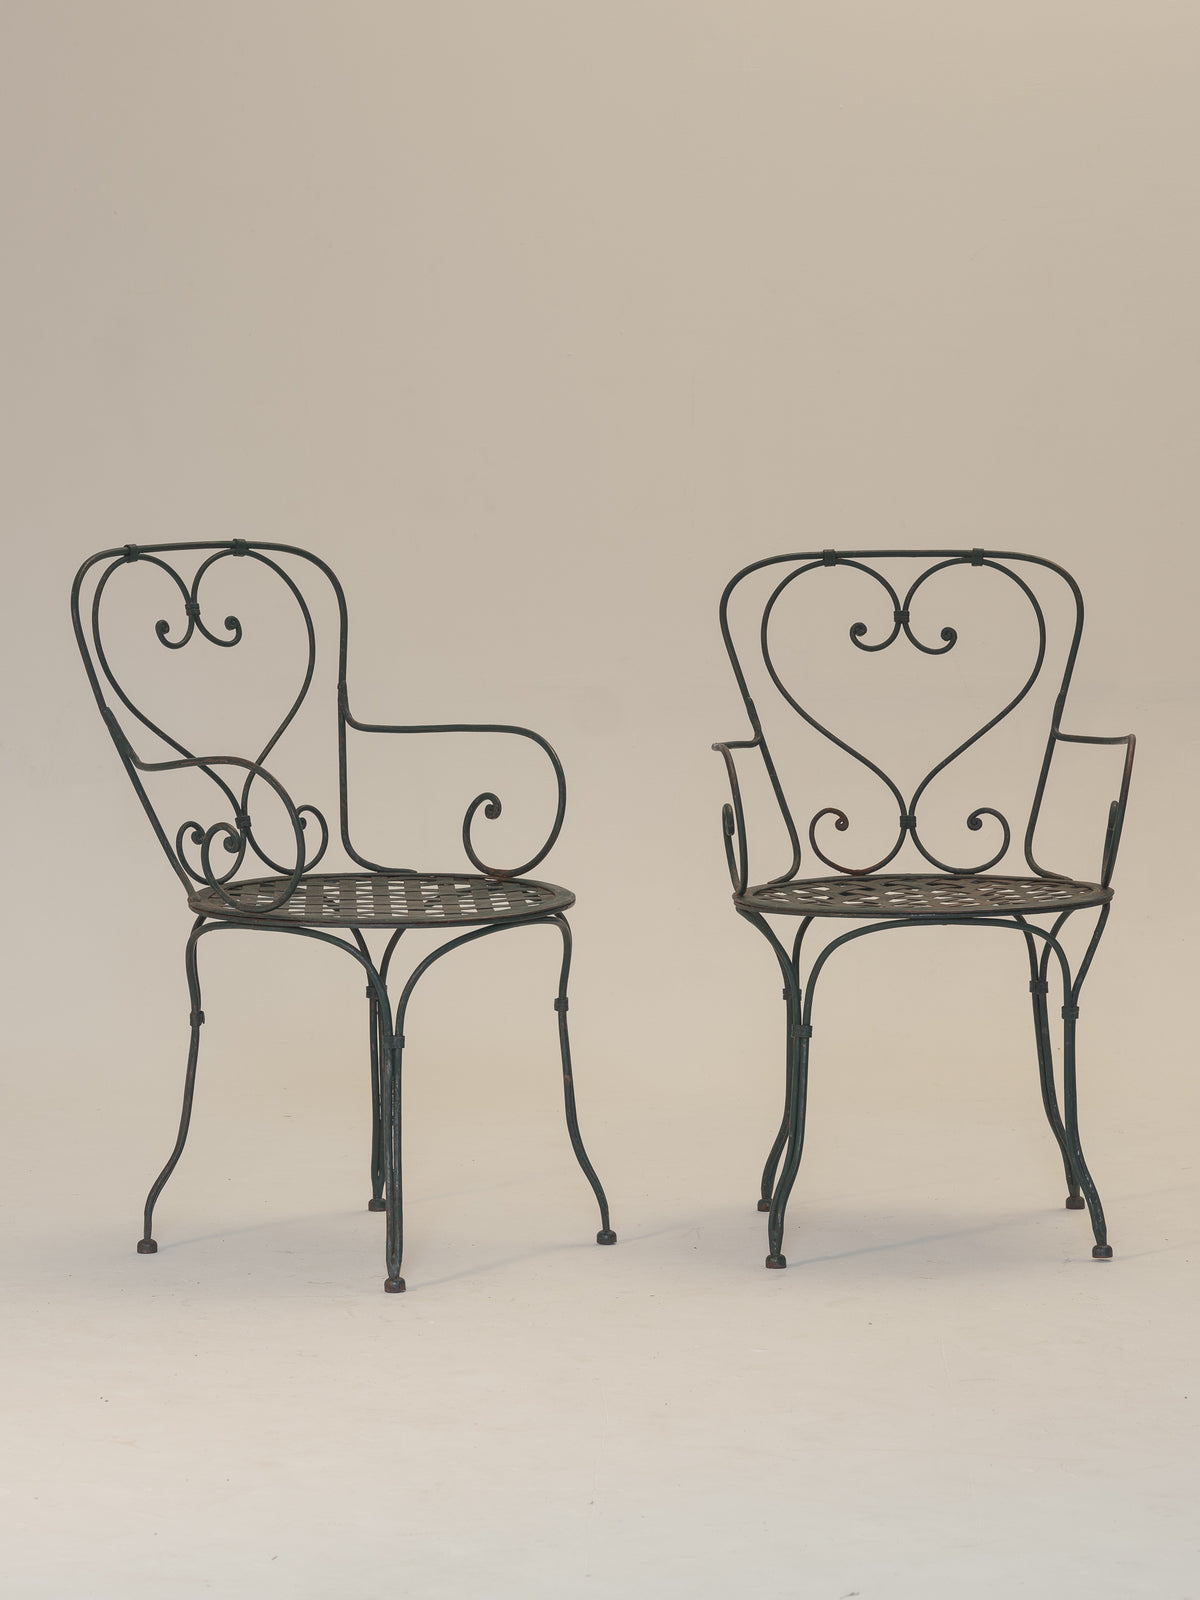 Pair of French Ironwork Chairs